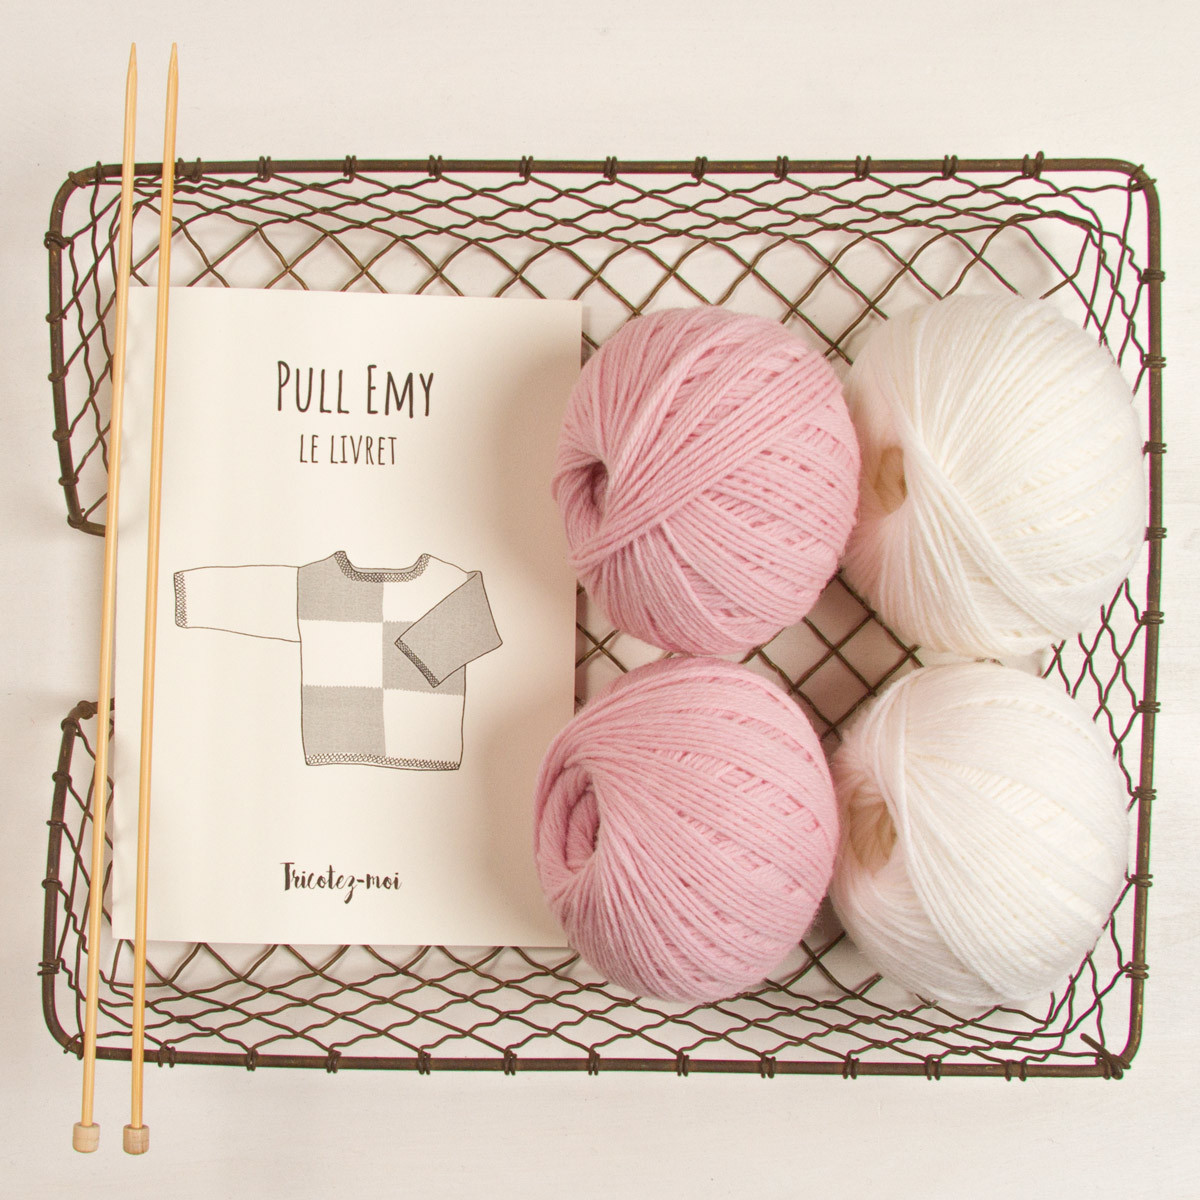 Pull Emy kit tricot